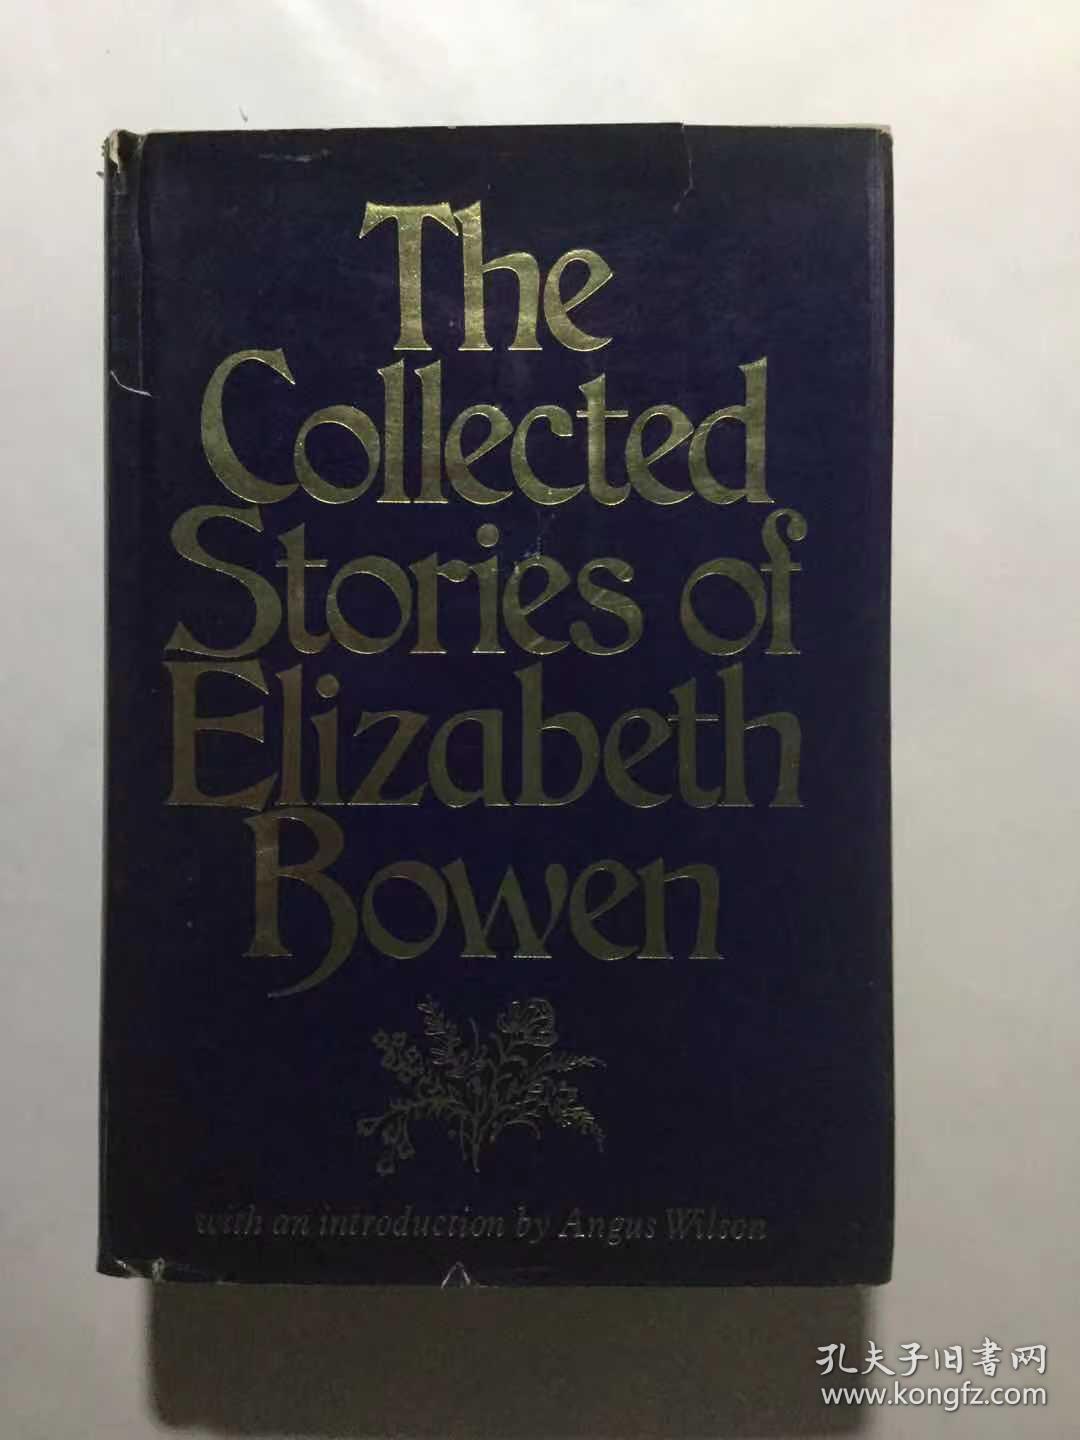 The Collected Stories of Elizabeth Bowen